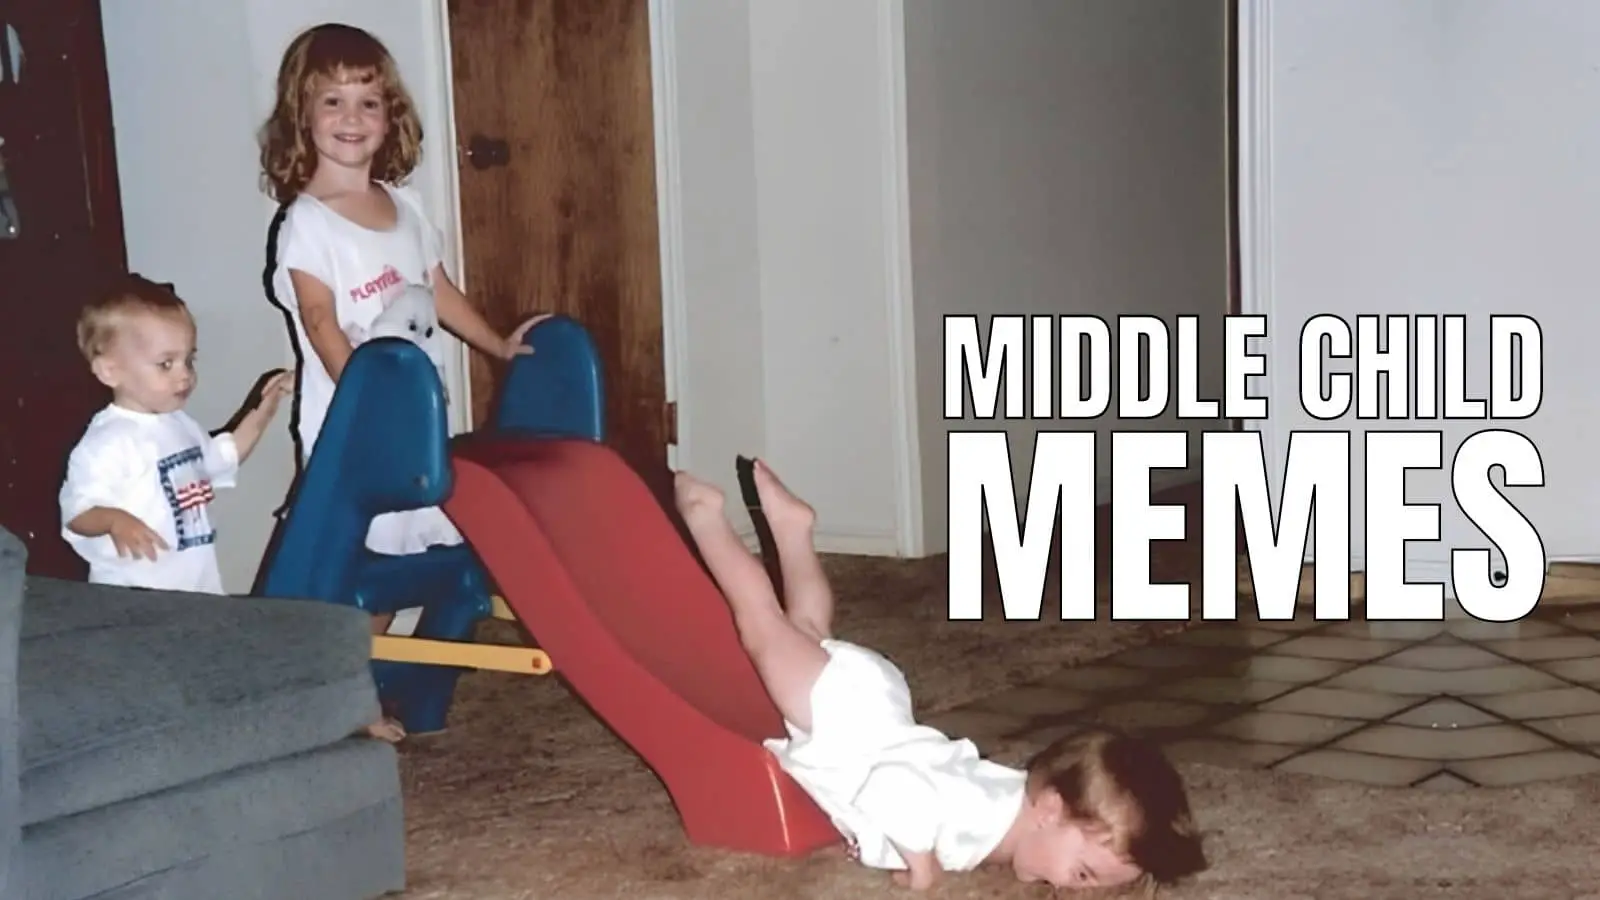 Funny Middle Child Memes on National Middle Child Day